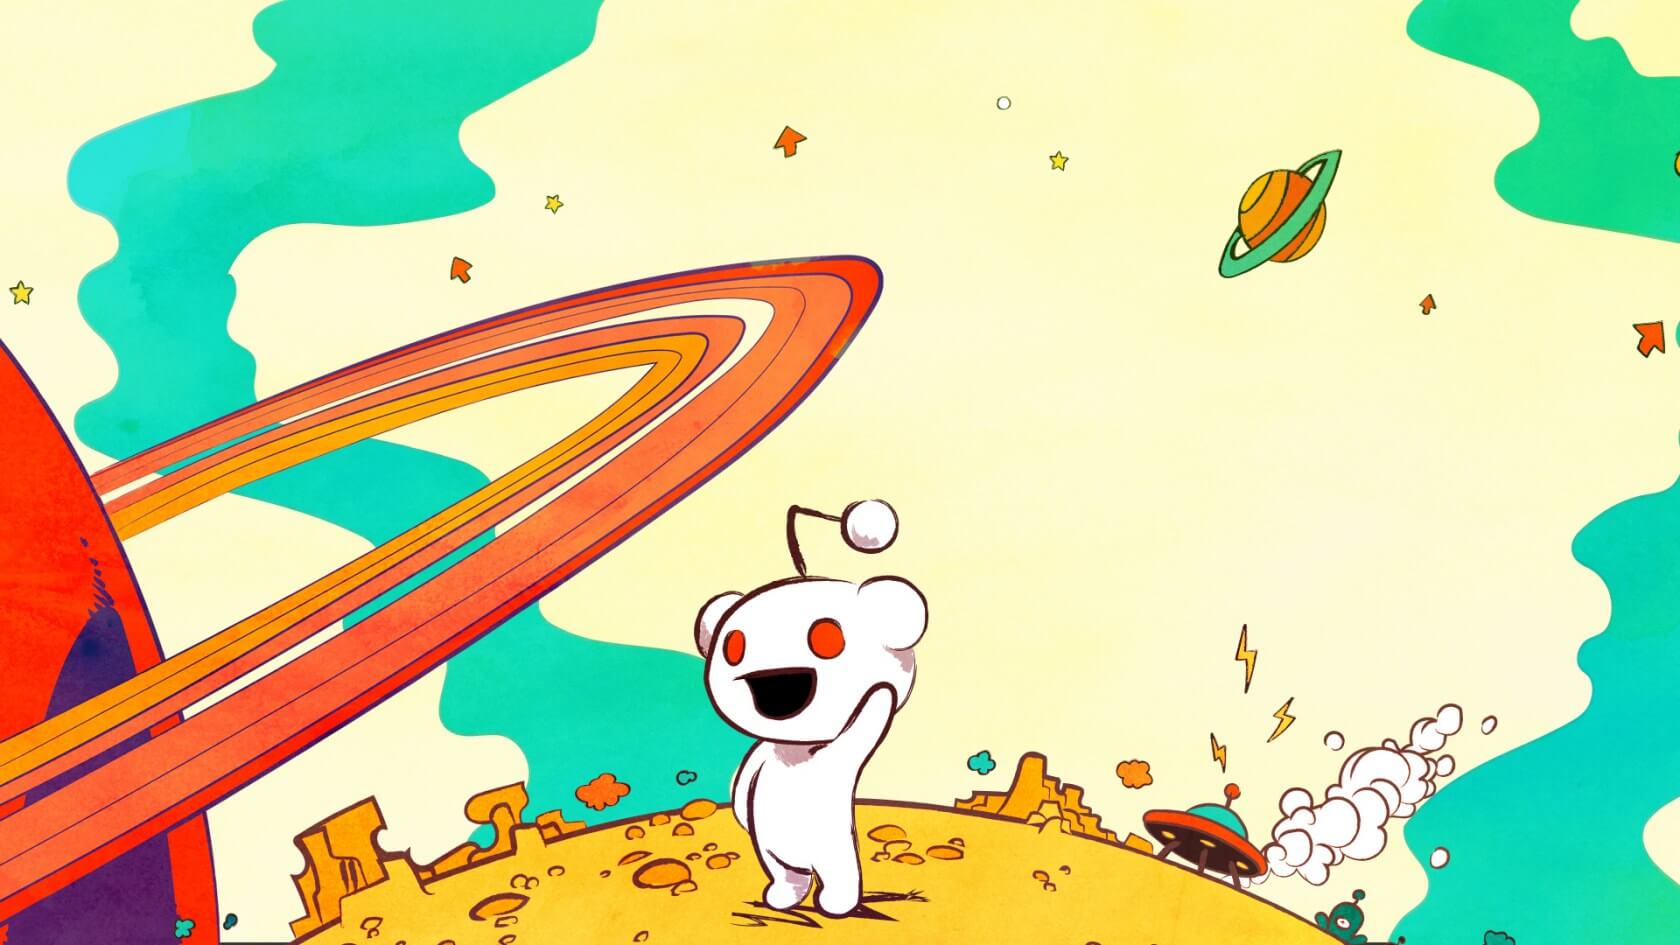 Reddit rolls out 'Community Award' system sitewide